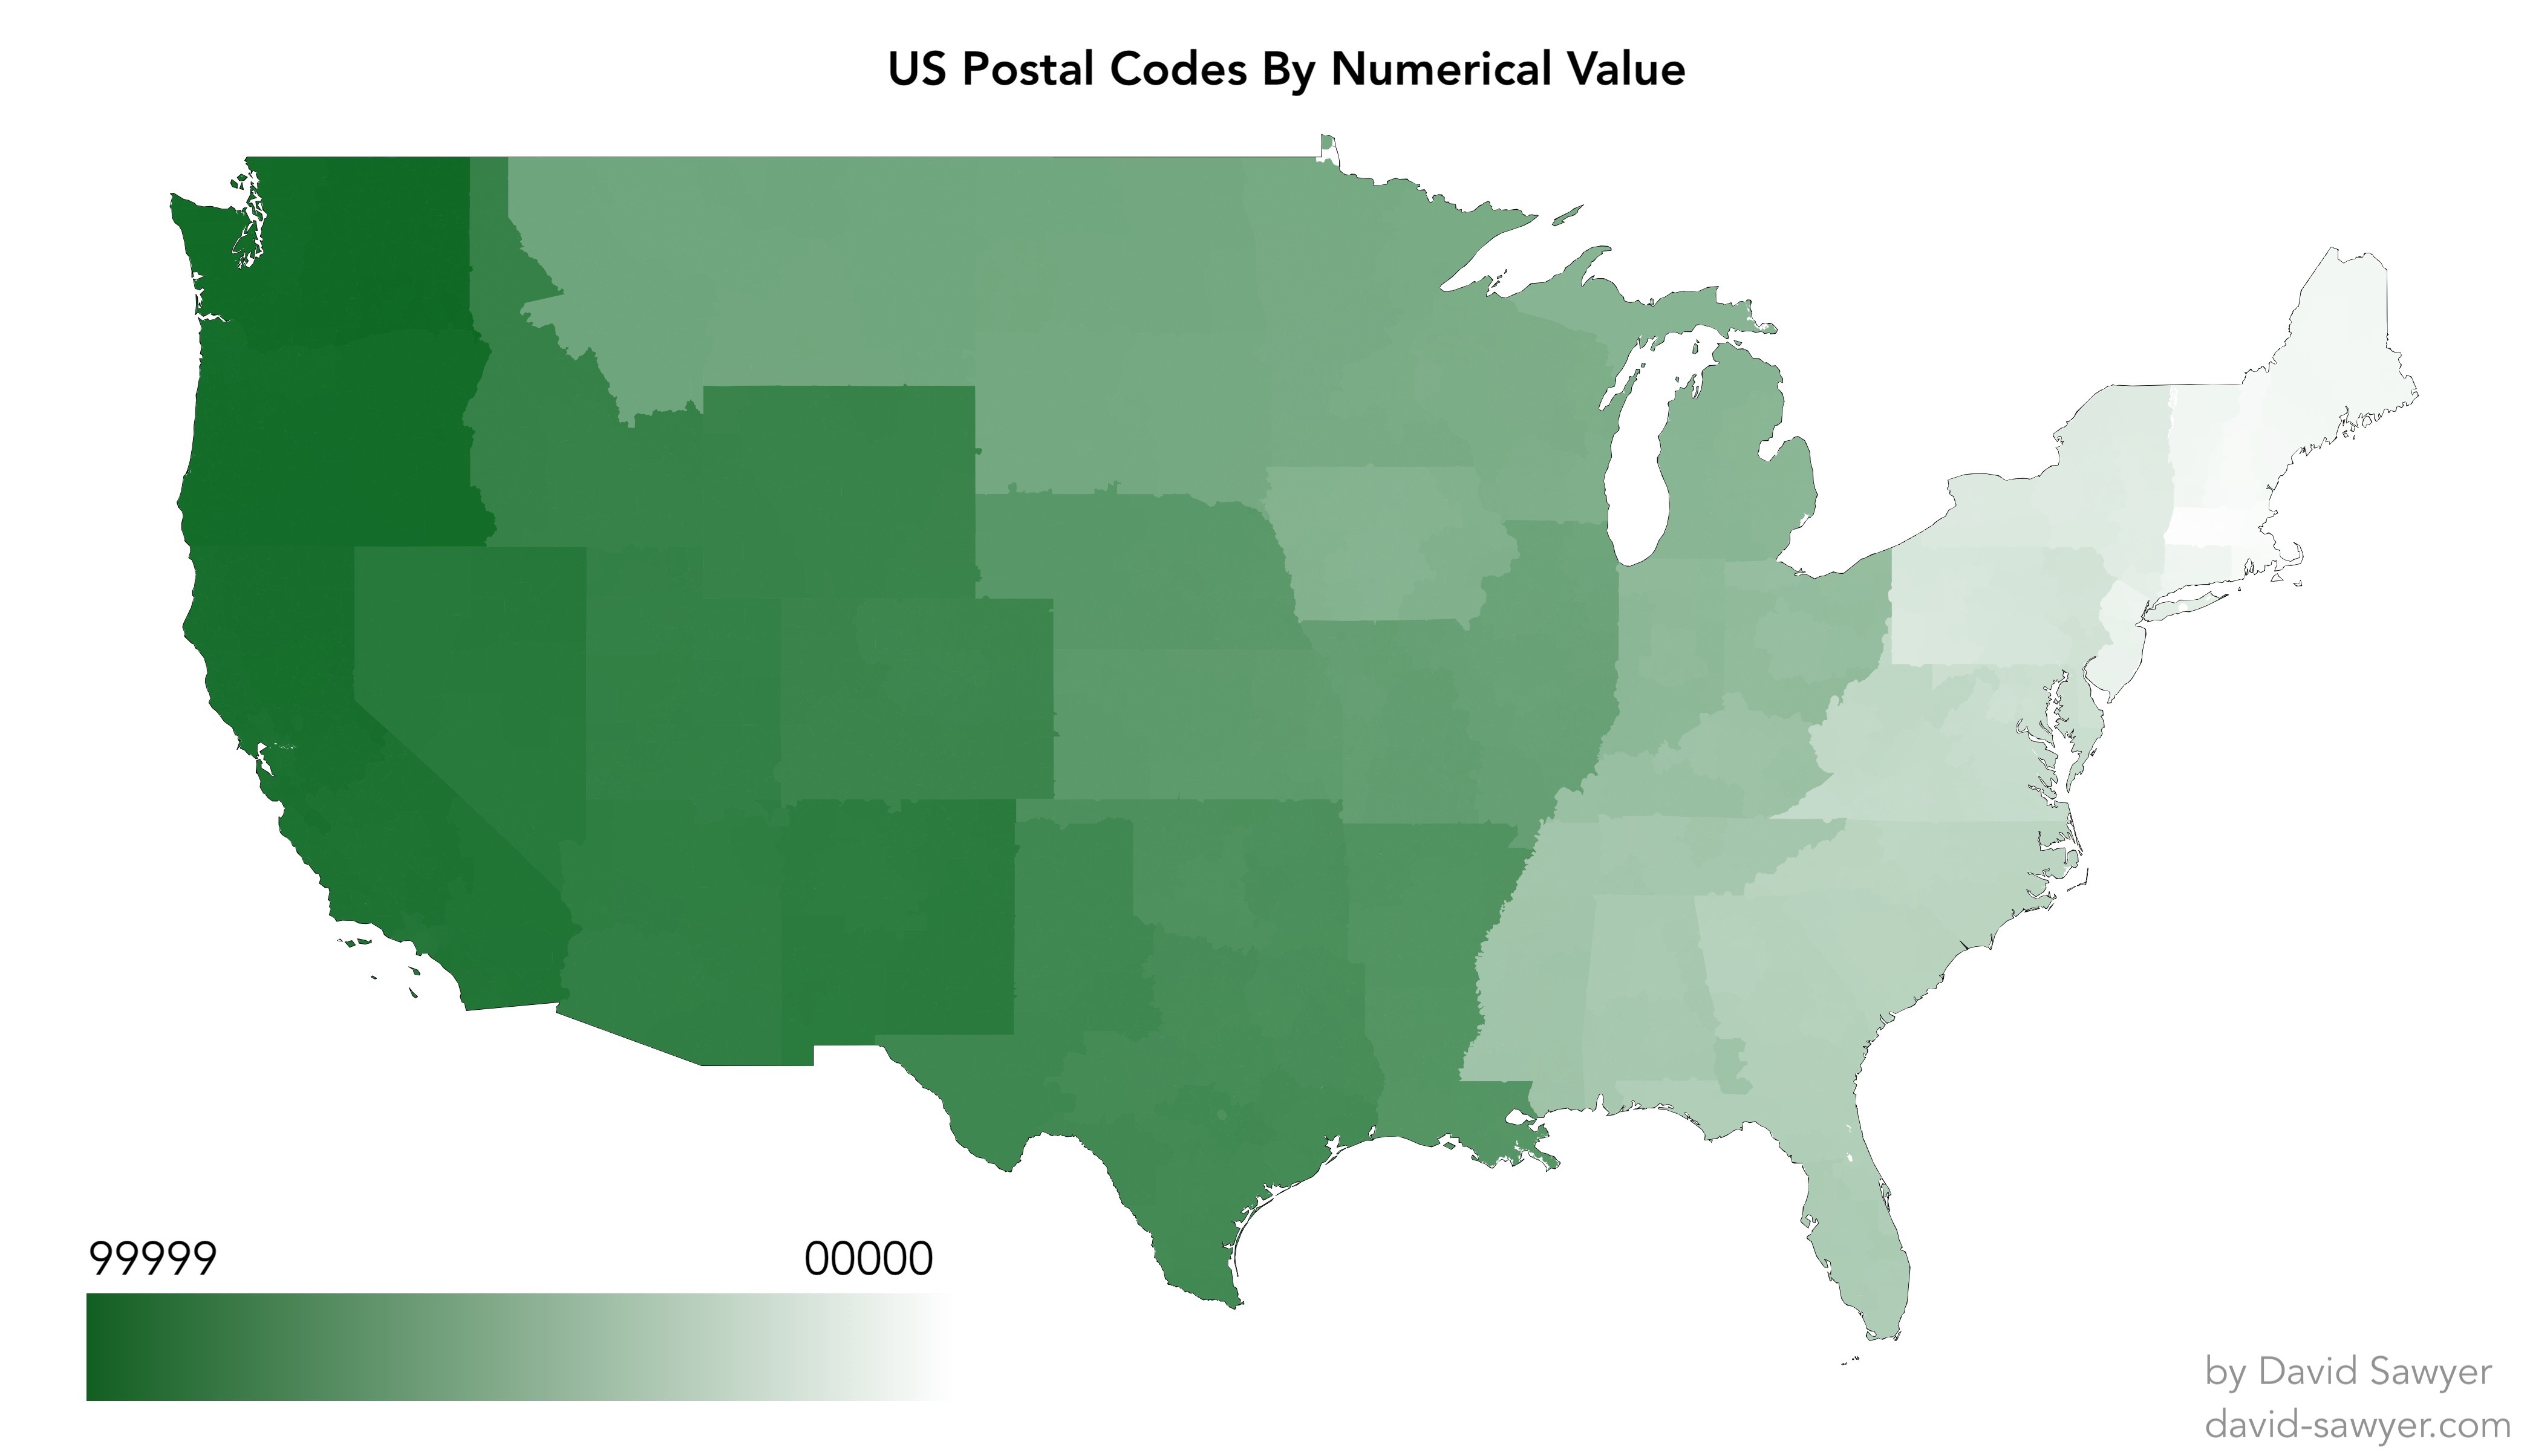 US Postal Codes By Numerical Value